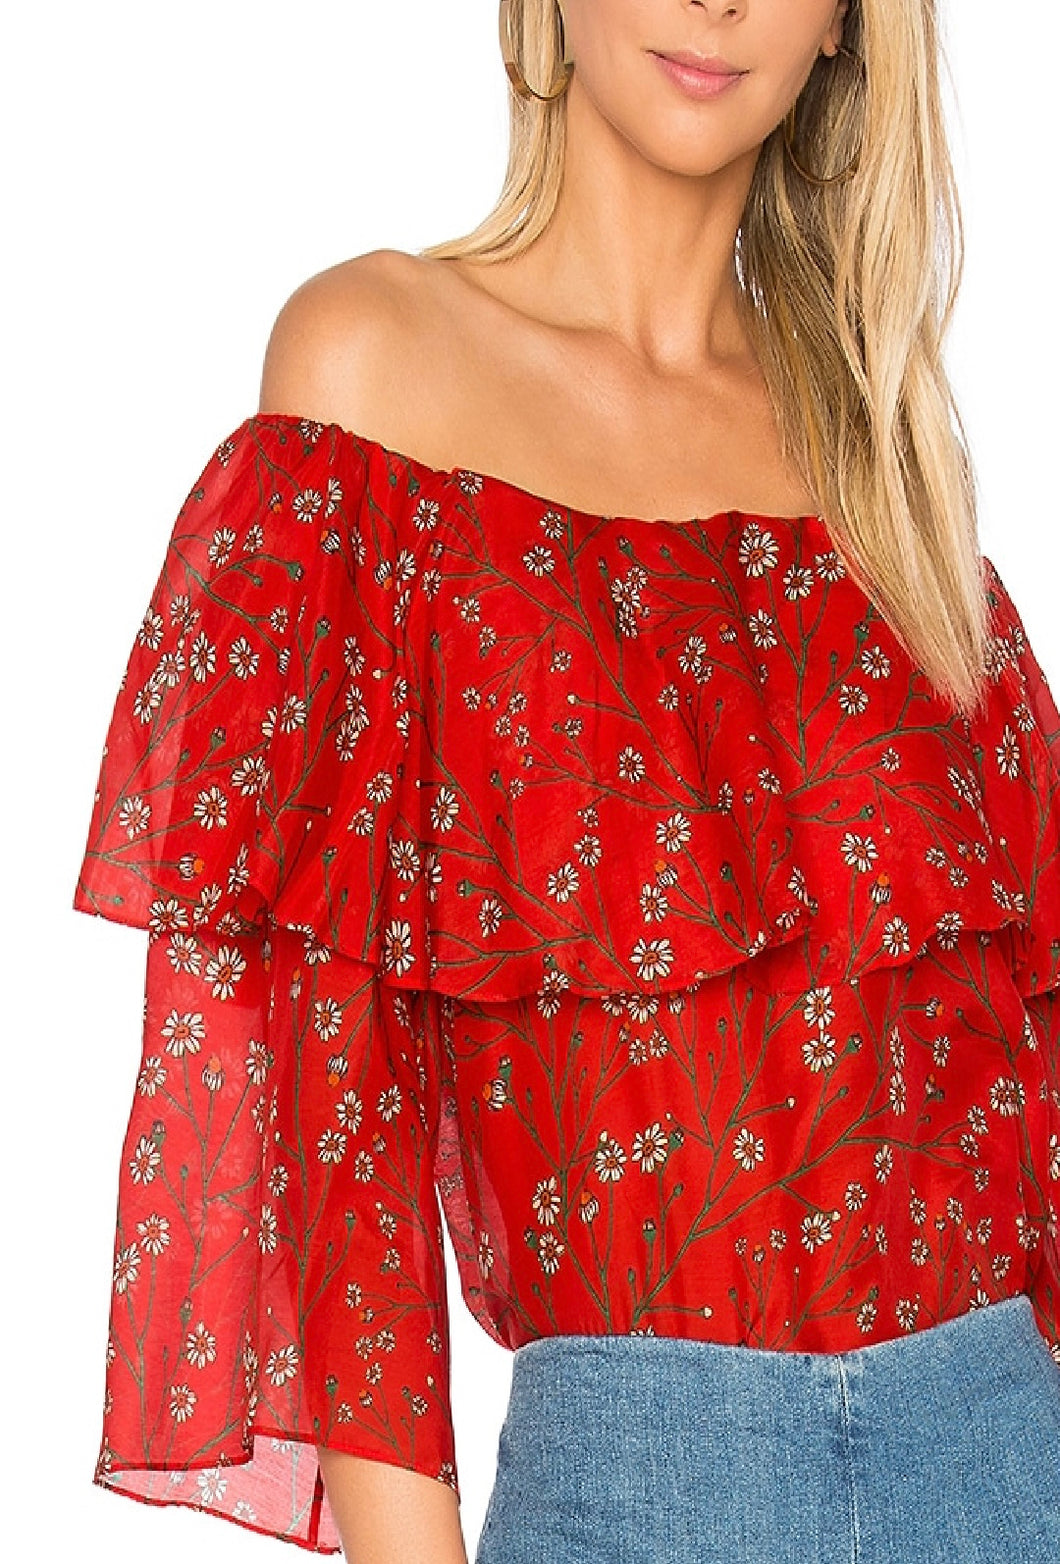 ALICE + OLIVIA
Meagan Off-the-Shoulder Double-Layer Floral Top, large